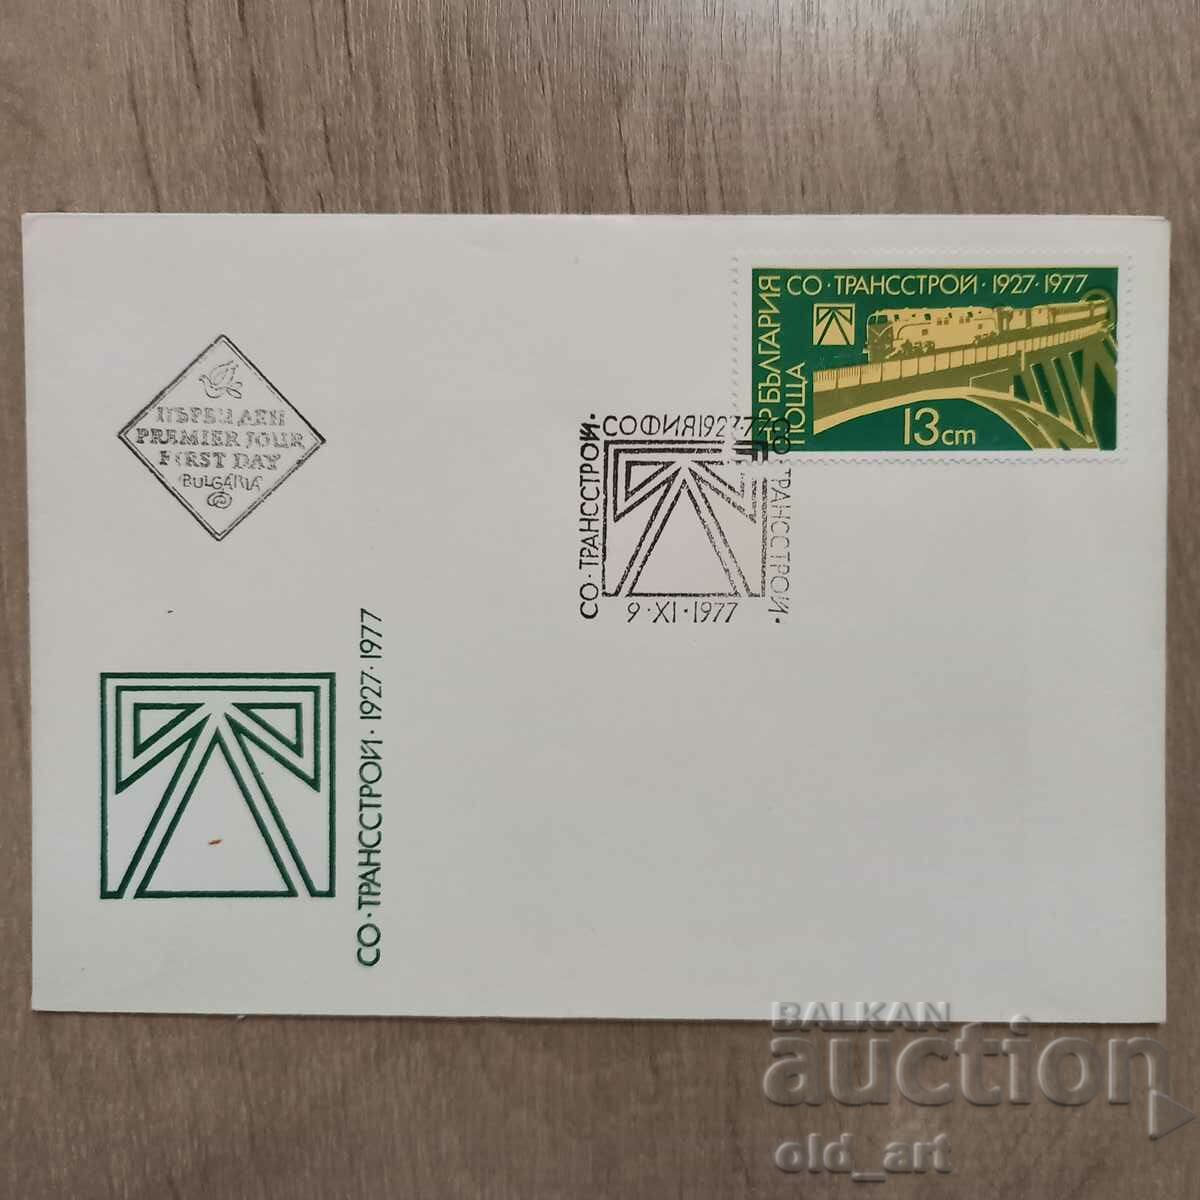 Mailing envelope - 50 years SO Transstroy